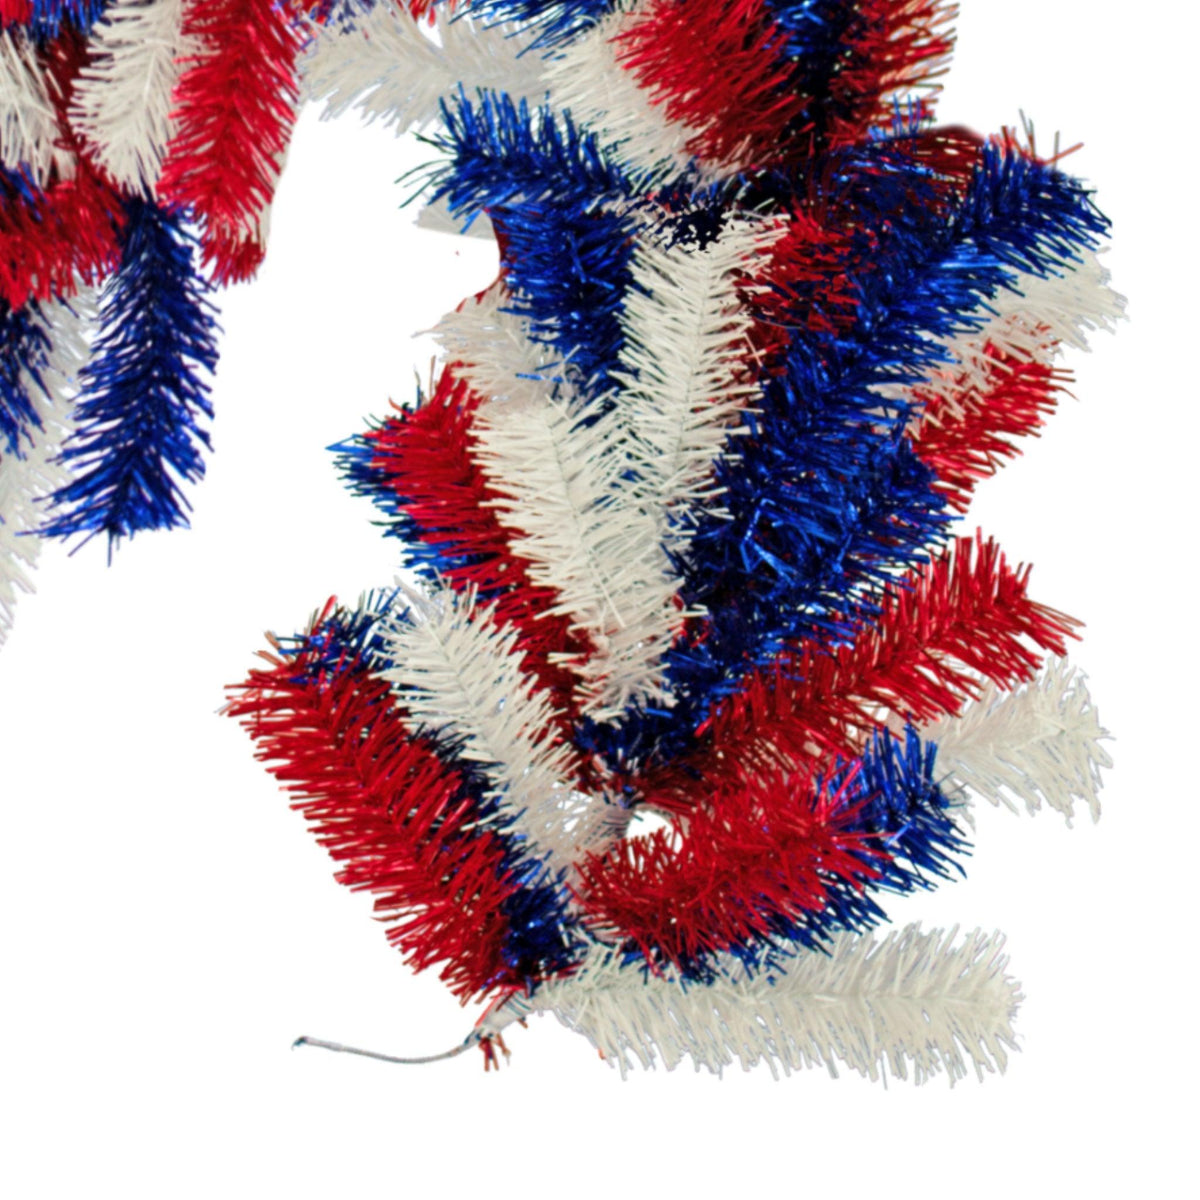 Shop for Lee Display's brand new 6FT Shiny Red, White, and Blue 4th of July Mixed Tinsel Brush Garlands on sale now at leedisplay.com.  End with wire